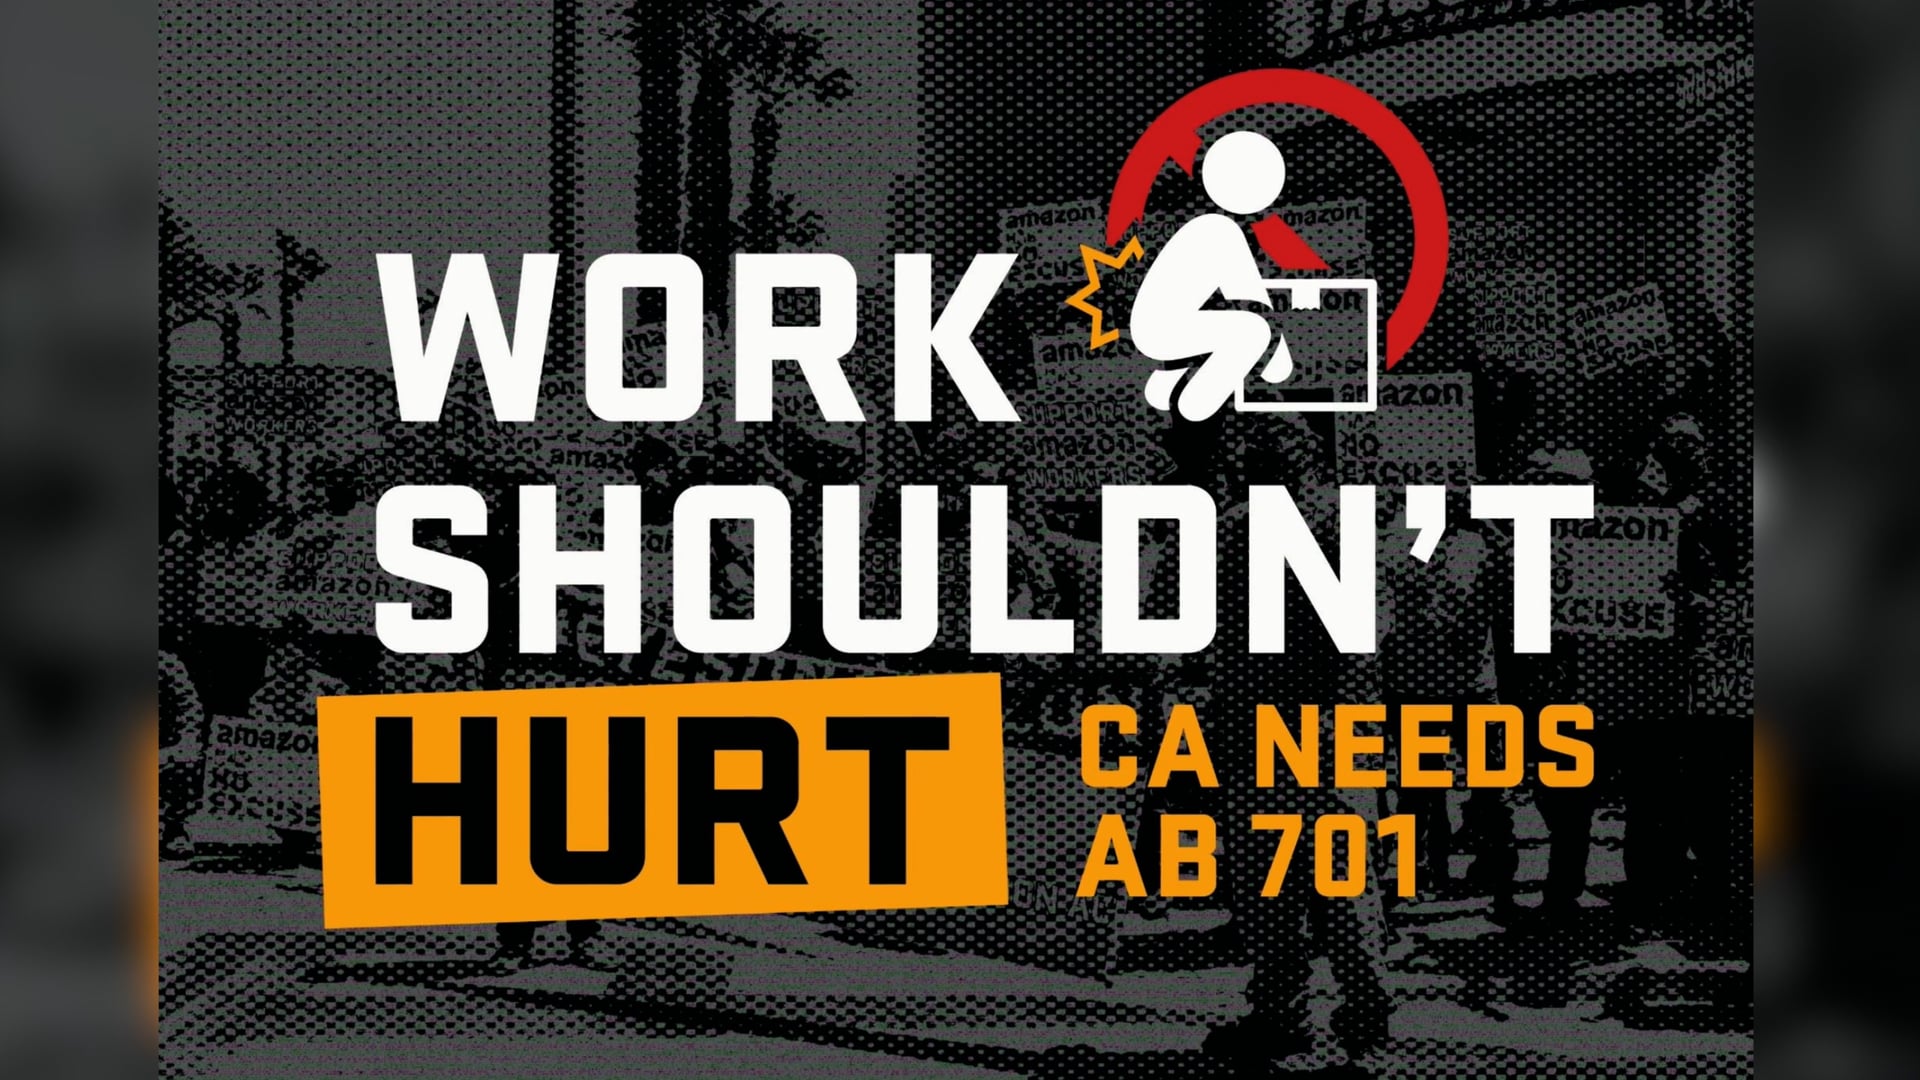 Work Shouldn't Have to Hurt - Amazon Workers